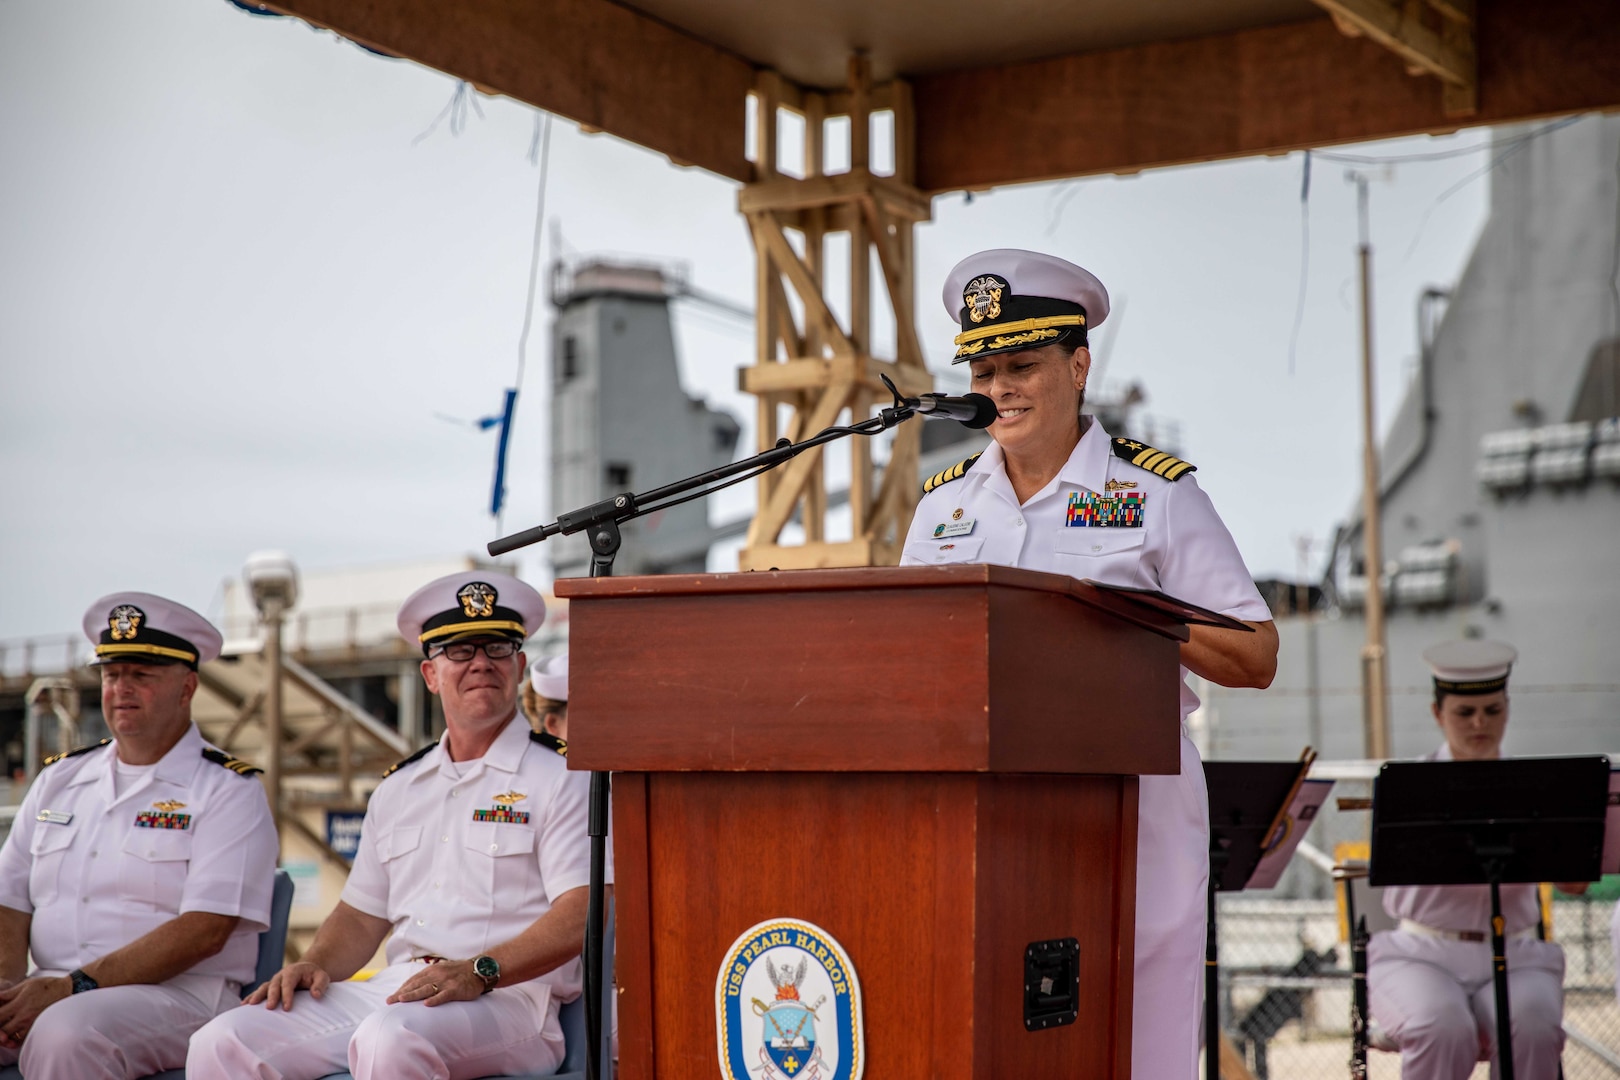 NUKU’ALOFA, Tonga (Nov. 20, 2023) – Capt. Claudine Caluori, mission commander of Pacific Partnership 2023, speaks during the Pacific Partnership 2023 Tonga closing ceremony in front of Harpers Ferry-class dock landing ship USS Pearl Harbor (LSD 52), Nov. 20.  Now in its 18th year, Pacific Partnership is the largest annual multinational humanitarian assistance and disaster relief preparedness mission conducted in the Indo-Pacific. (U.S. Navy photo by Mass Communication Specialist 2nd Class Megan Alexander)